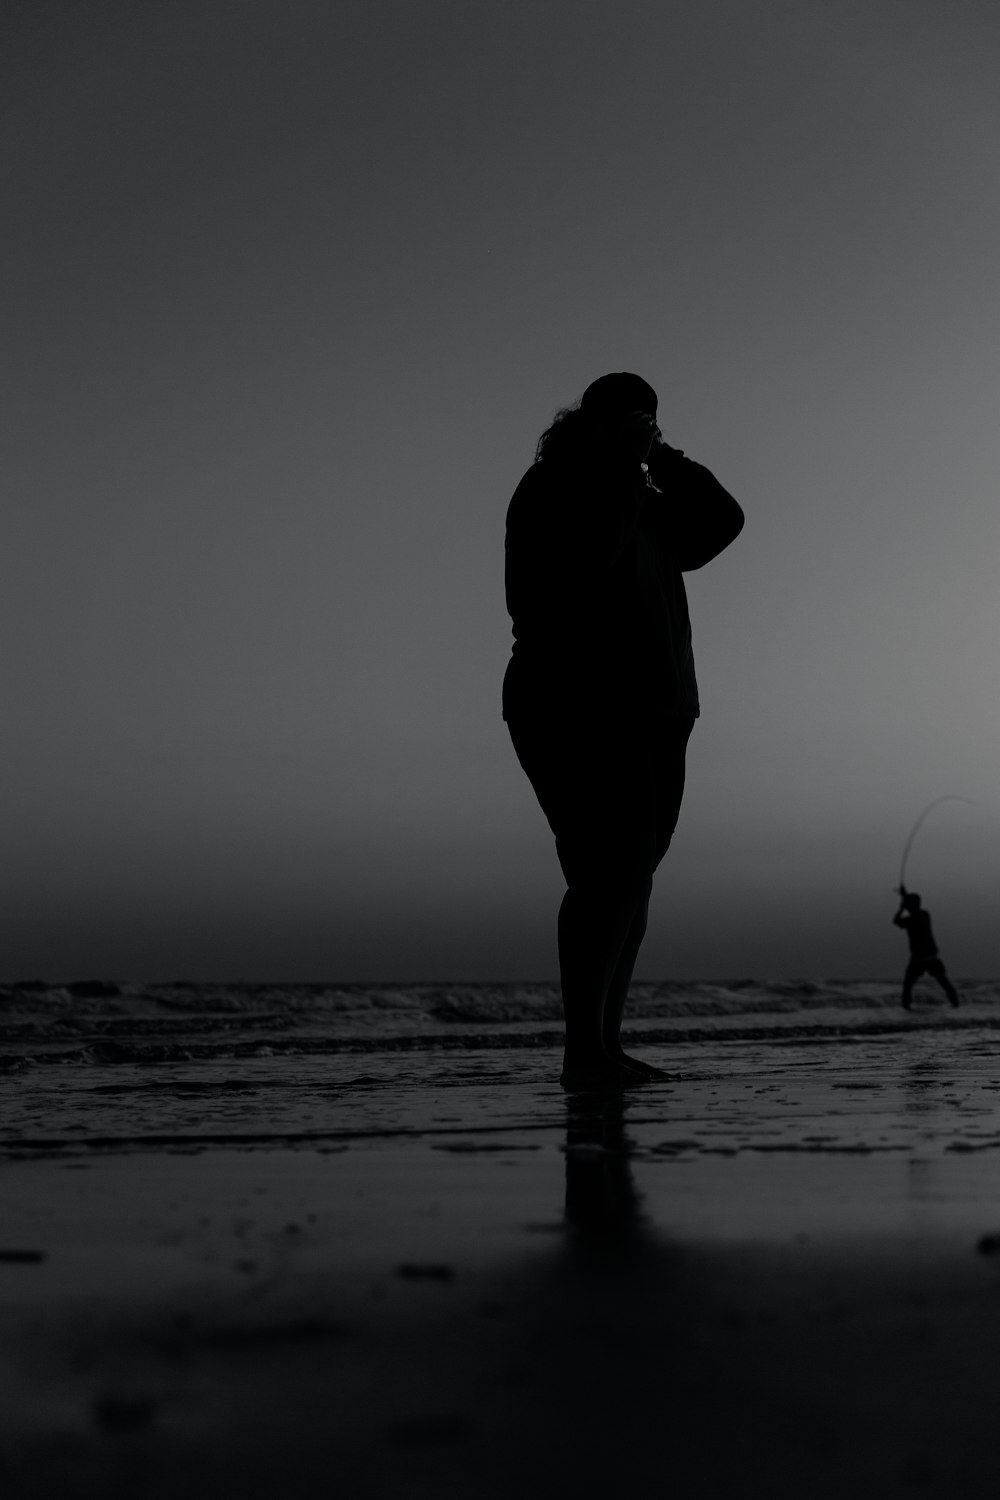 silhouette of man and woman kissing on beach during sunset